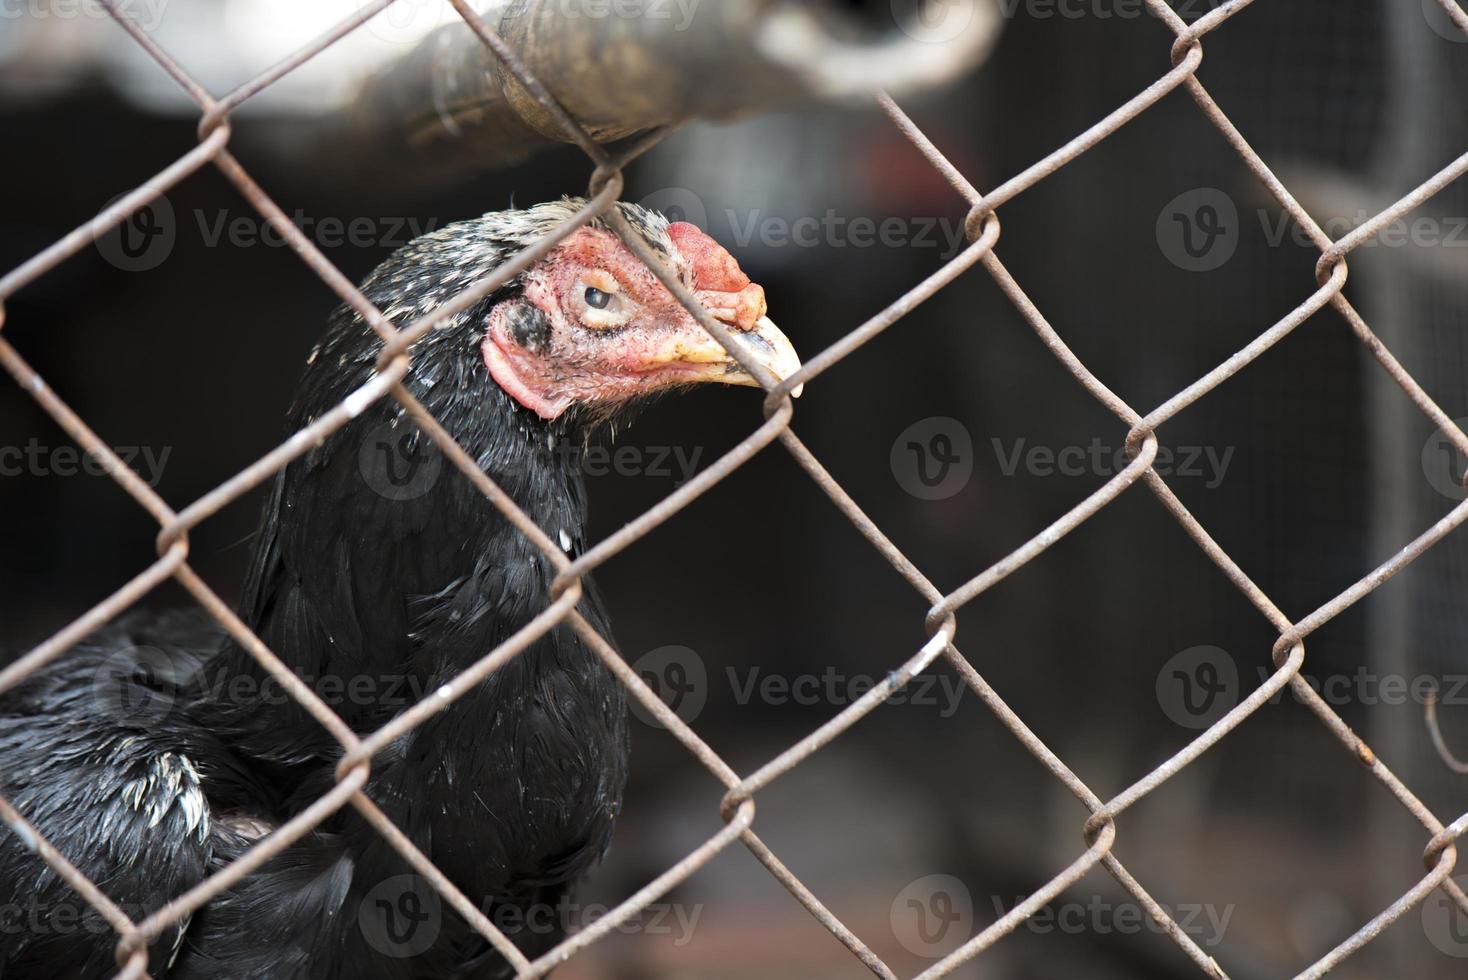 Gamecock chicken in the steel cage henhouse, Animal concept photo